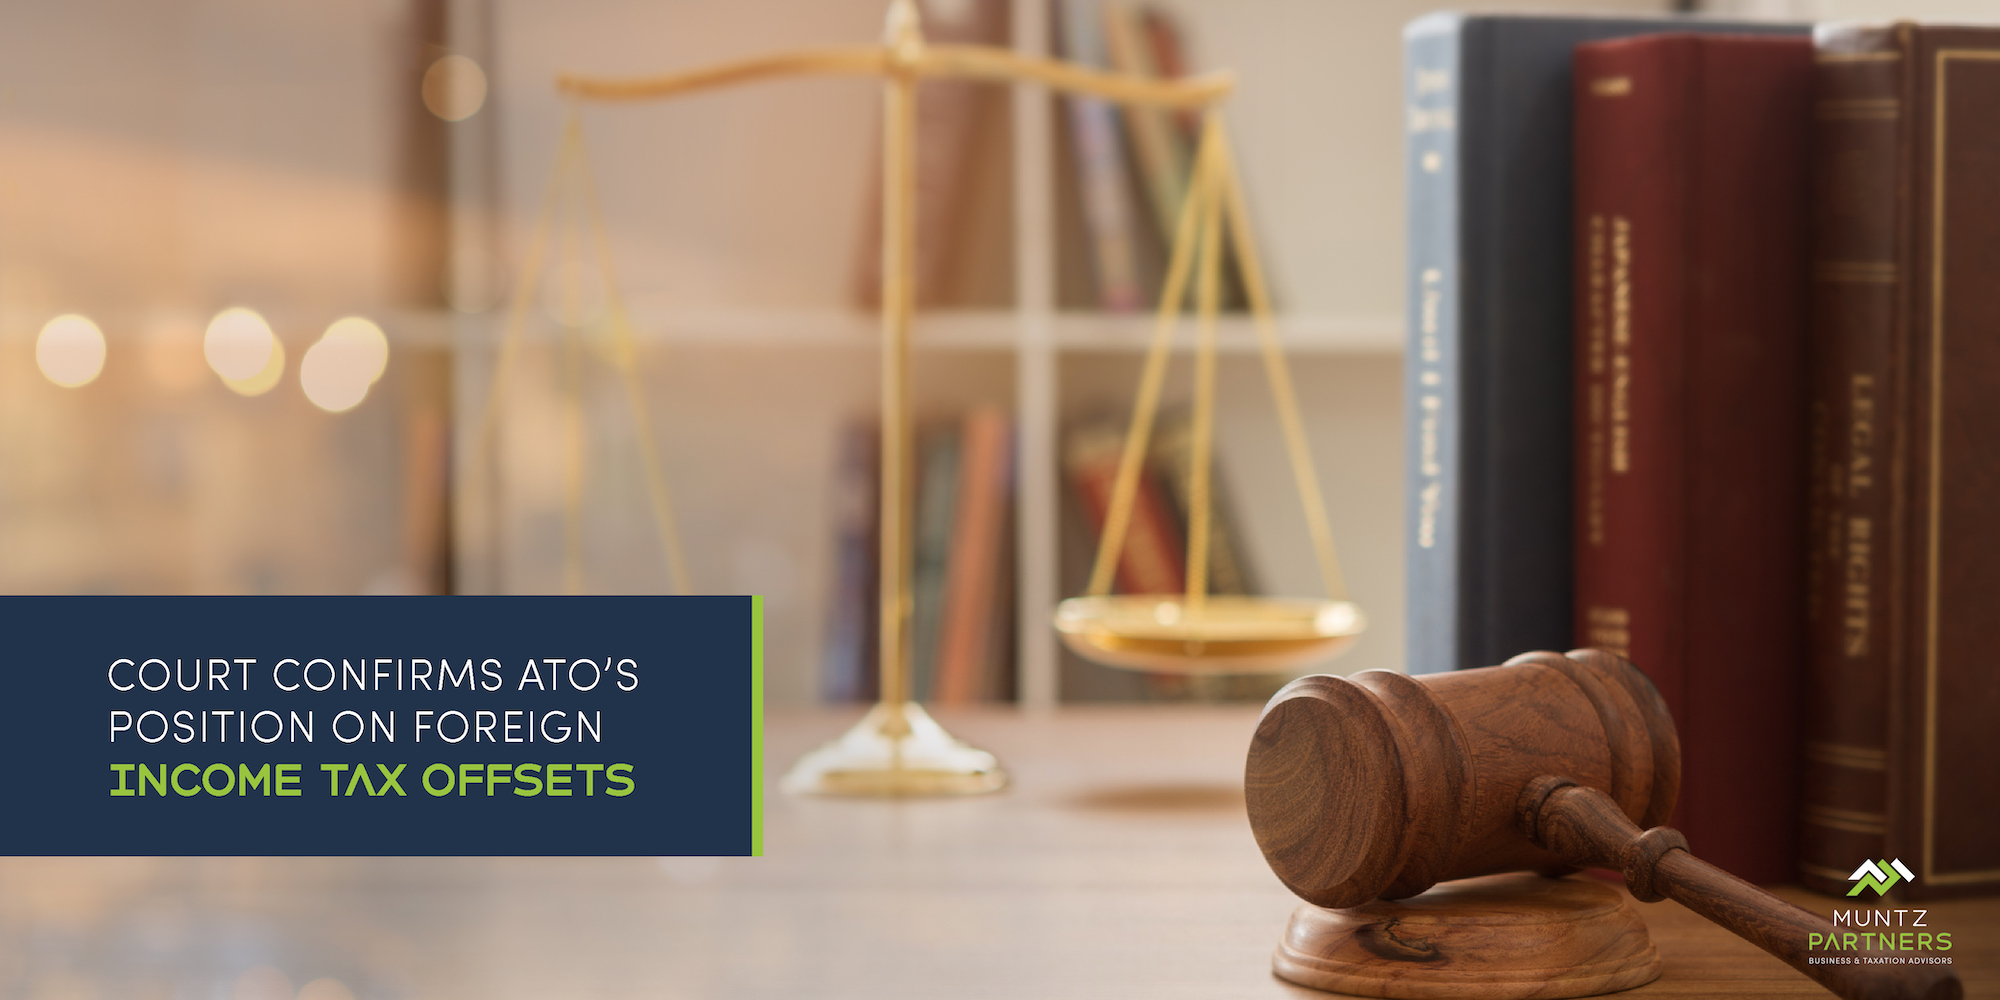 Court confirms ATO's position on foreign income tax offsets